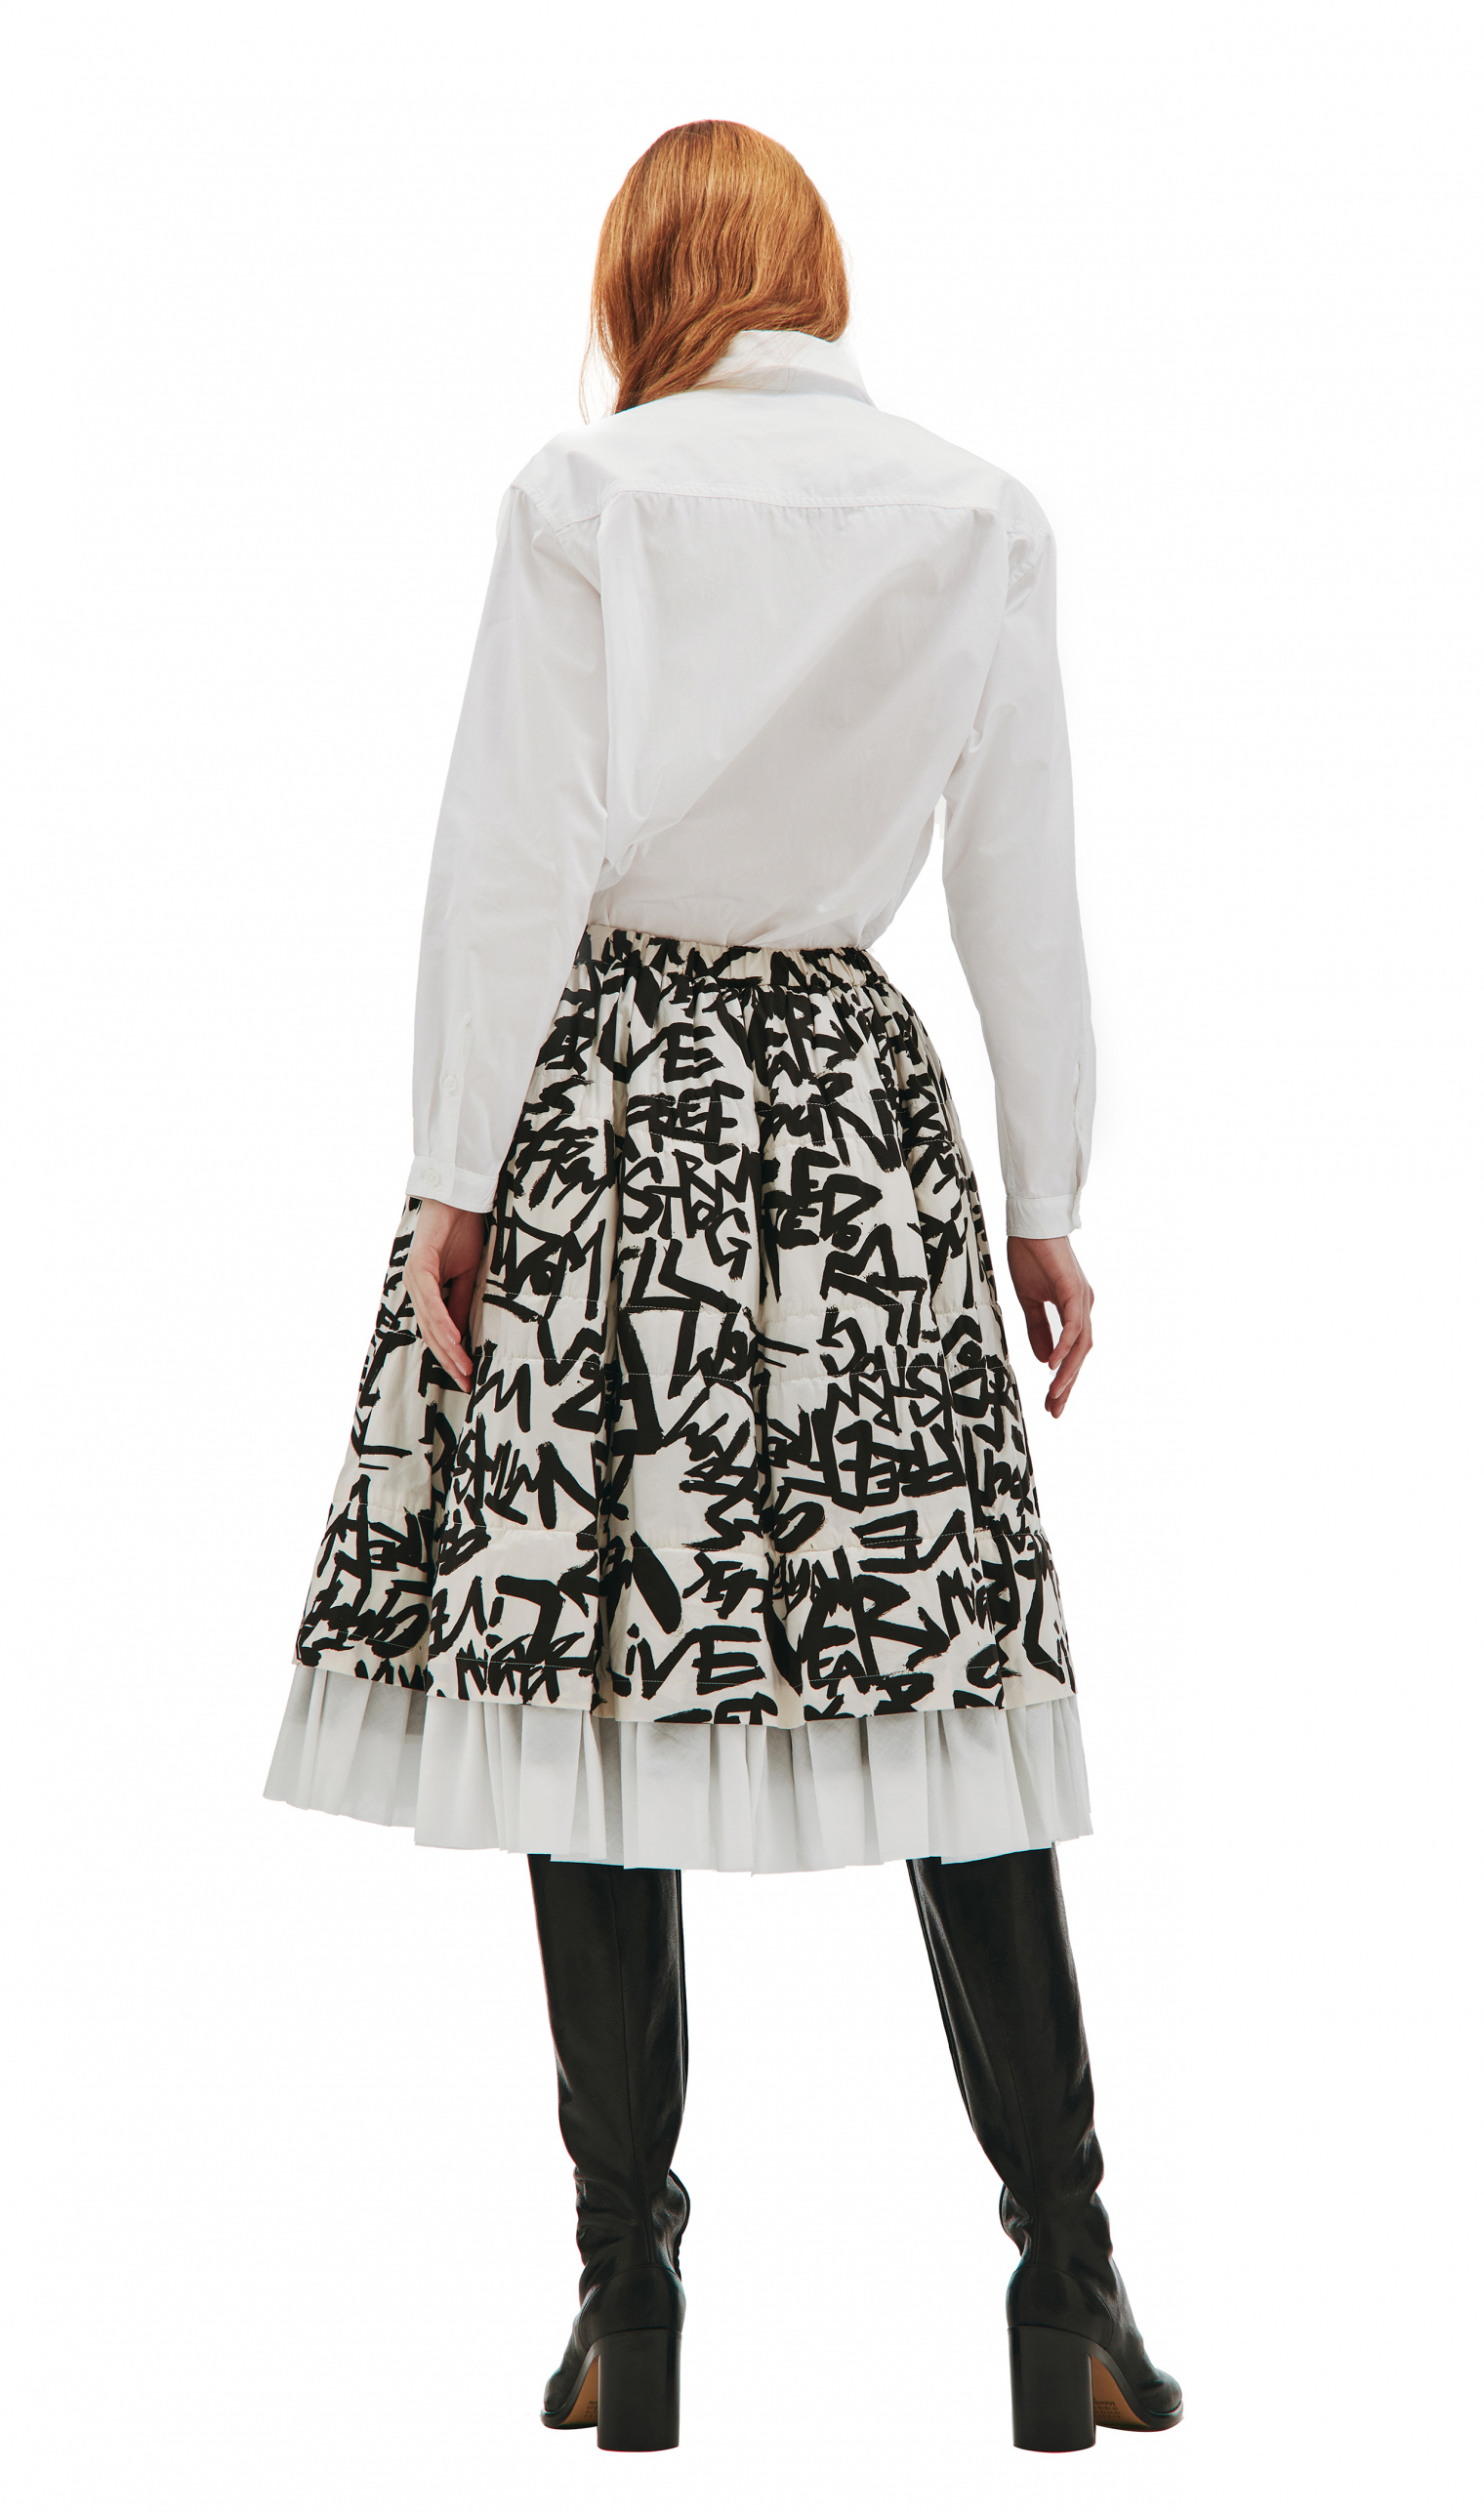 Comme des Garcons CdG Printed Skirt with ruffles